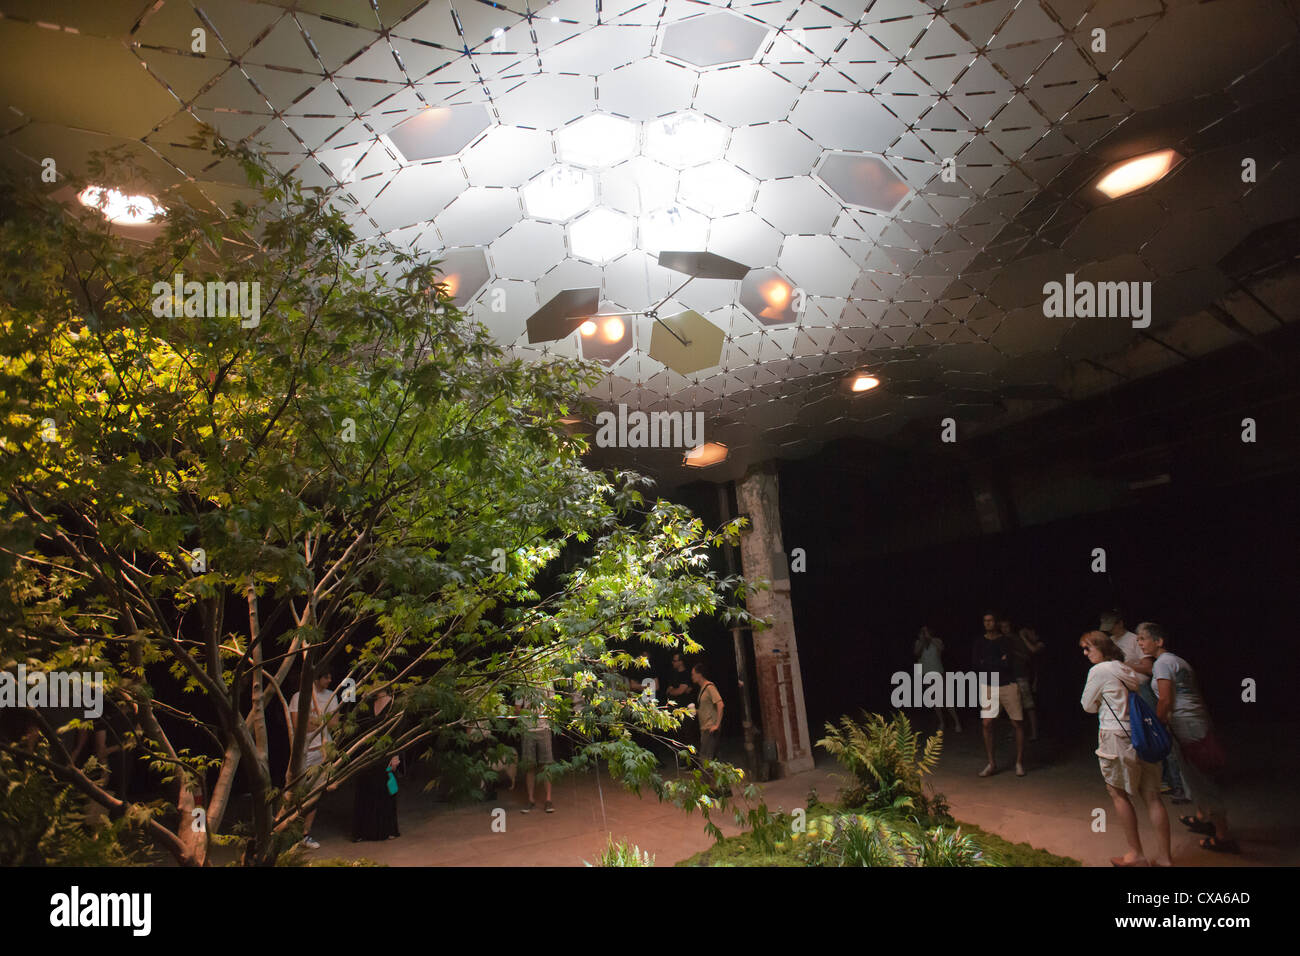 'Imagining the Lowline' exhibit seen at the old Essex Street Market in the Lower East Side neighborhood in New York Stock Photo